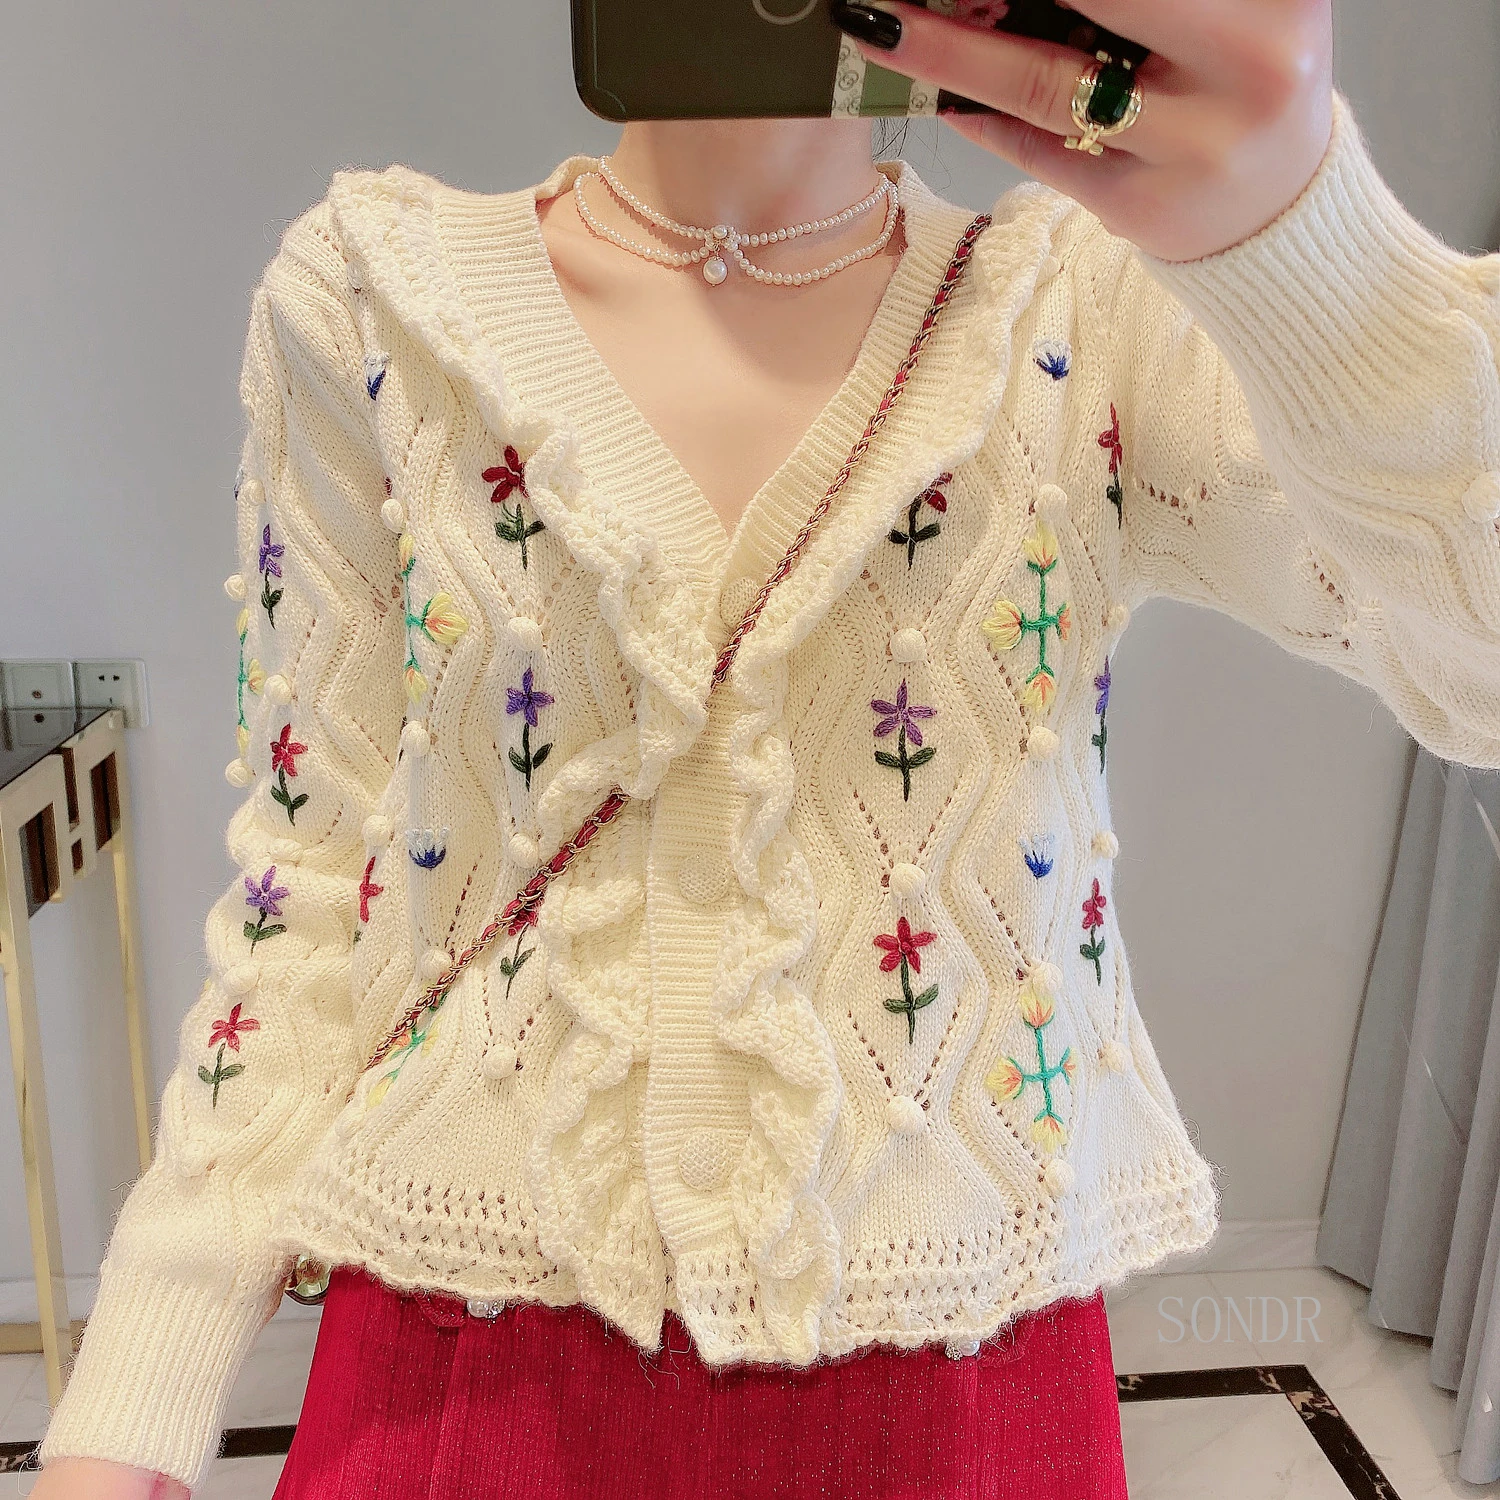 Hand Hook Flower Cardigan Crop Top with Hariball Ruffles V Neck Long Sleeve Knitted Cardigan Women Sweater Coat Vintage Tops